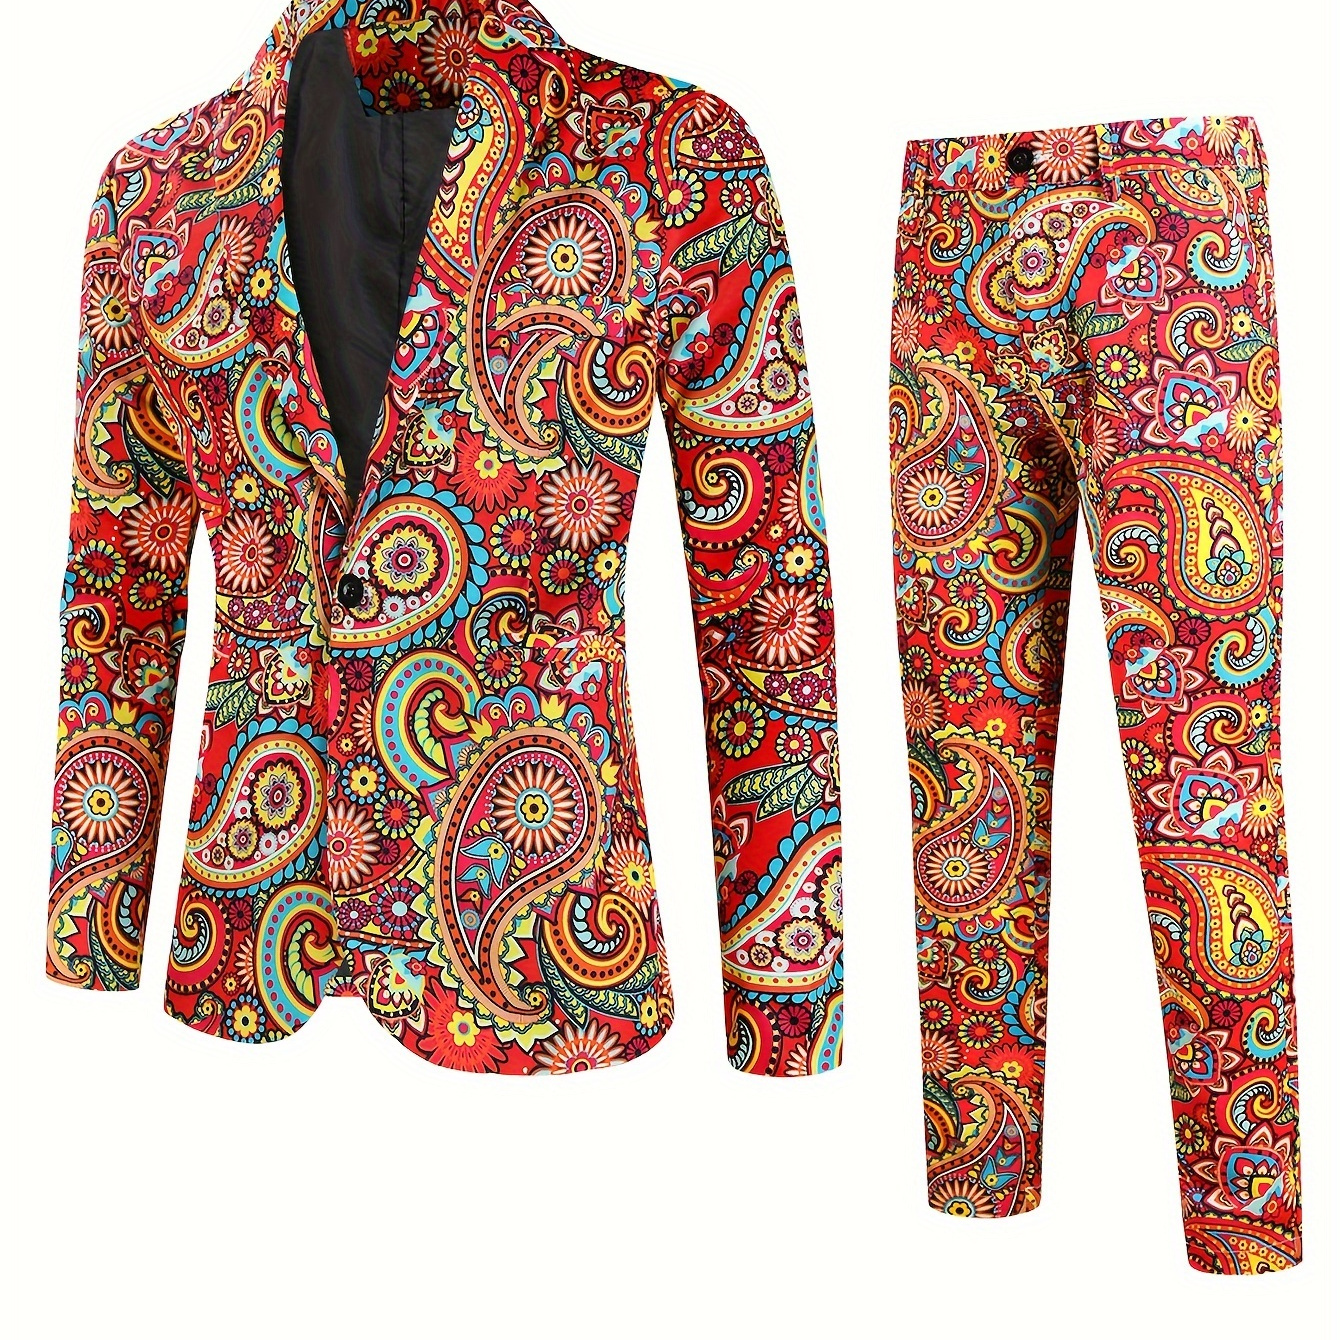 

Men's Stylish Casual Blazer And Pants Set, 2-piece Vibrant Paisley Pattern Digital Print Suit Set, Tailored Fit For Party & Daily Wear